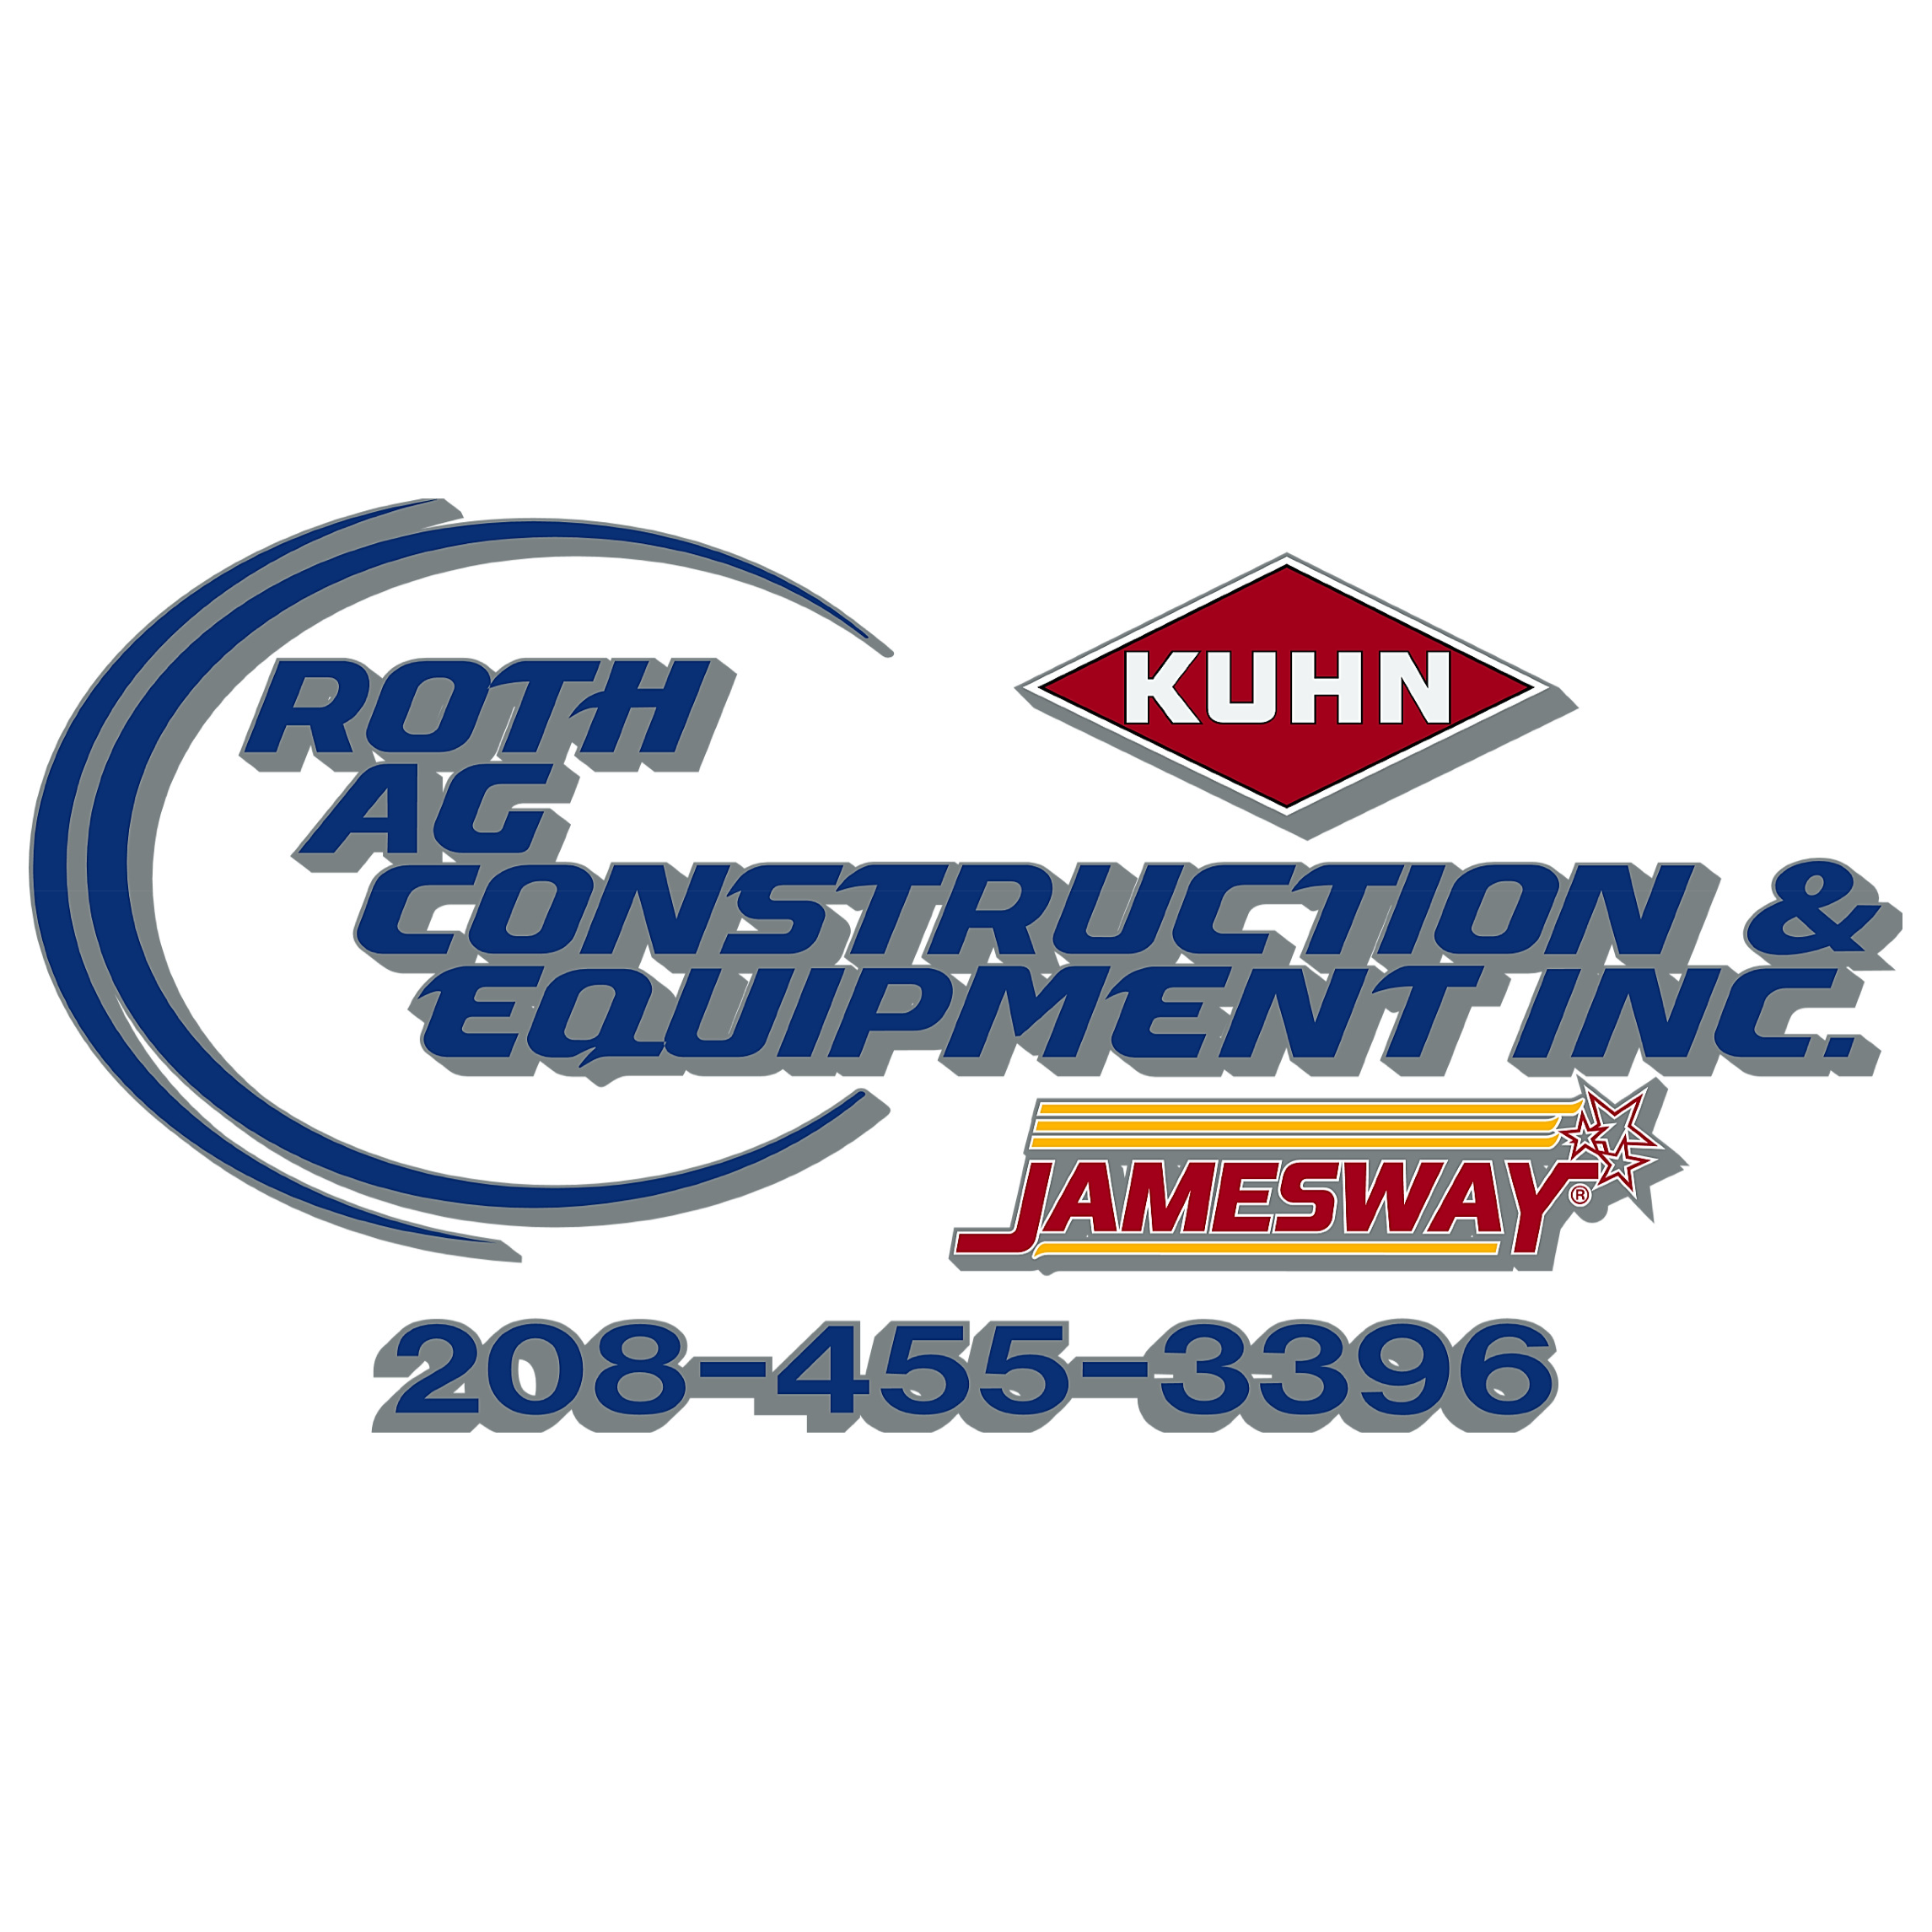 Roth Ag Equipment & Construction